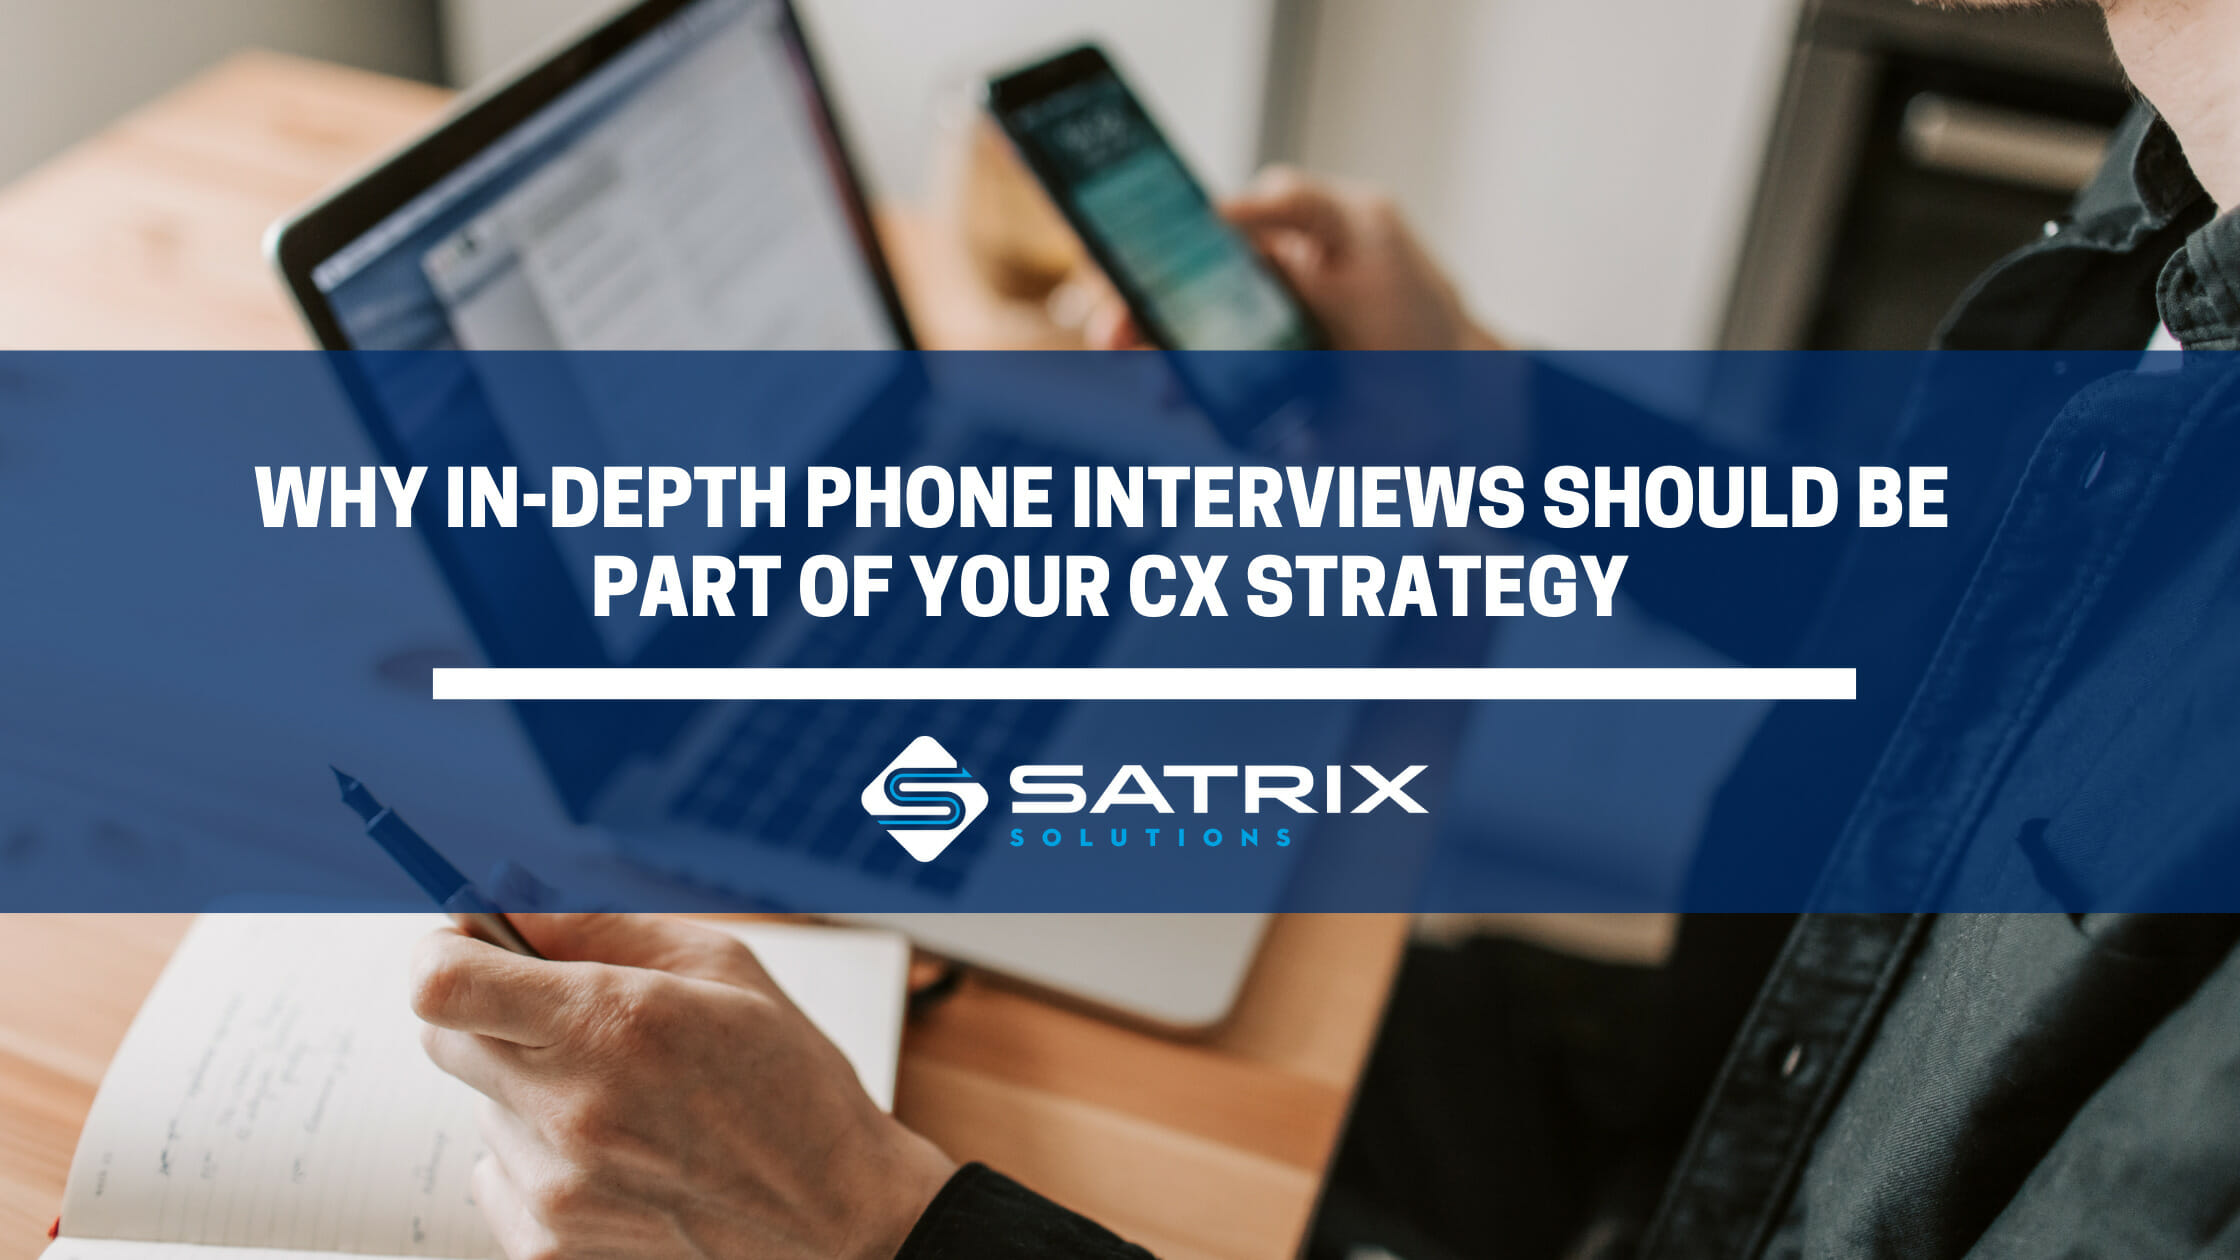 Why In-Depth Phone Interviews Should Be Part of your CX Strategy